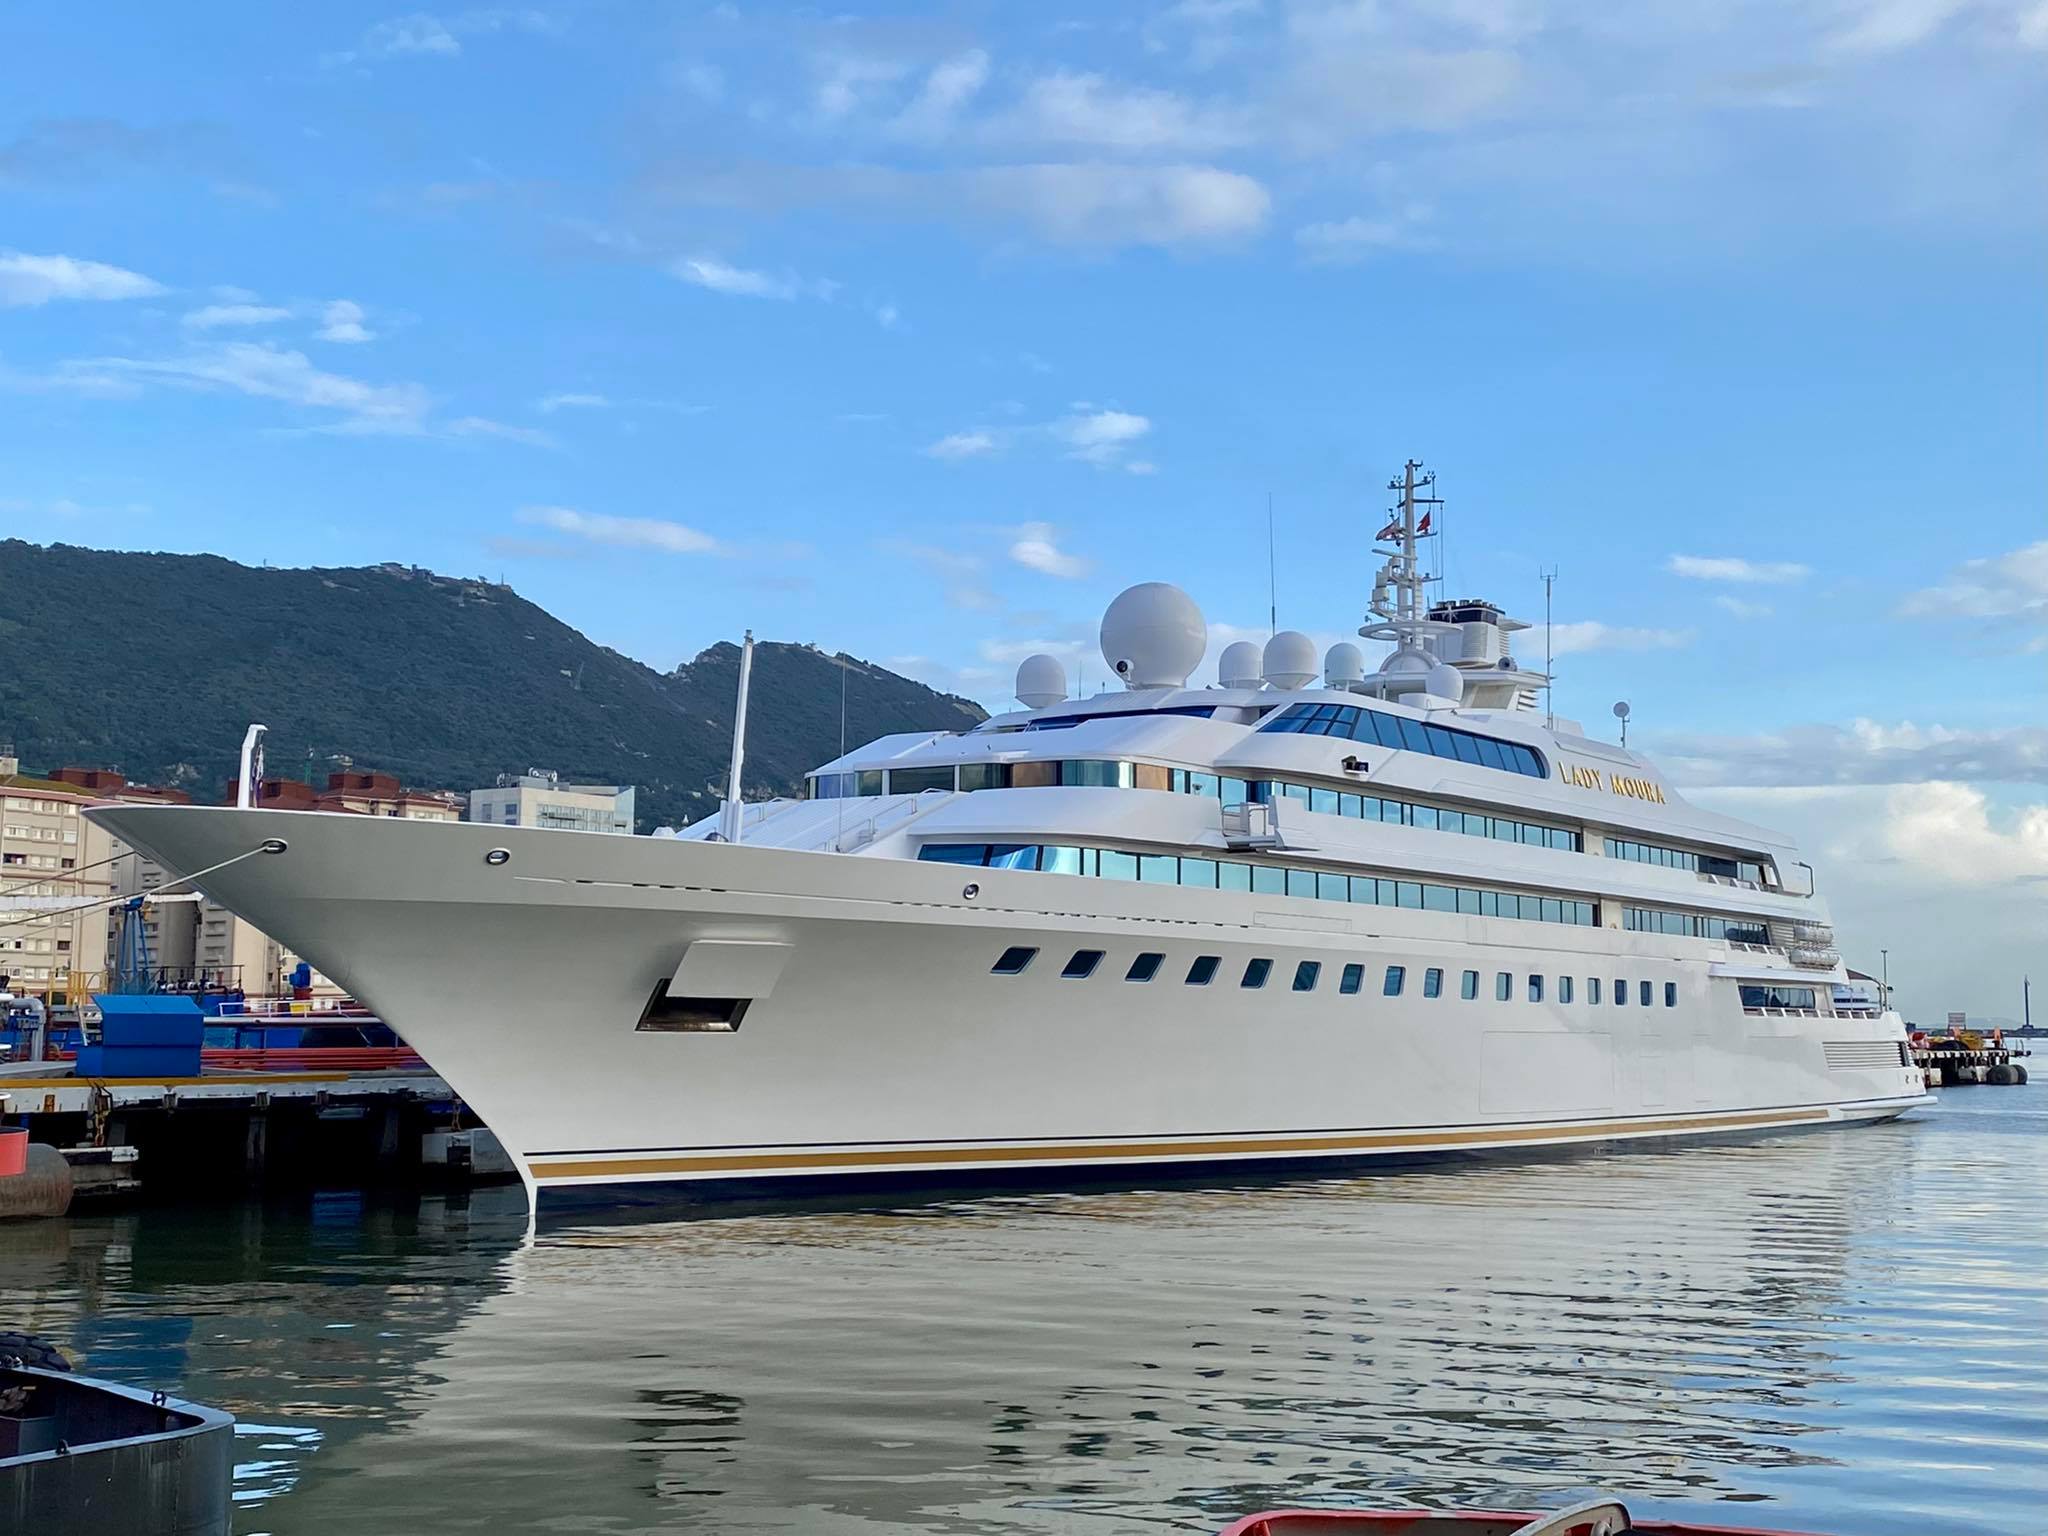 The yacht Lady Moura in Gibraltar